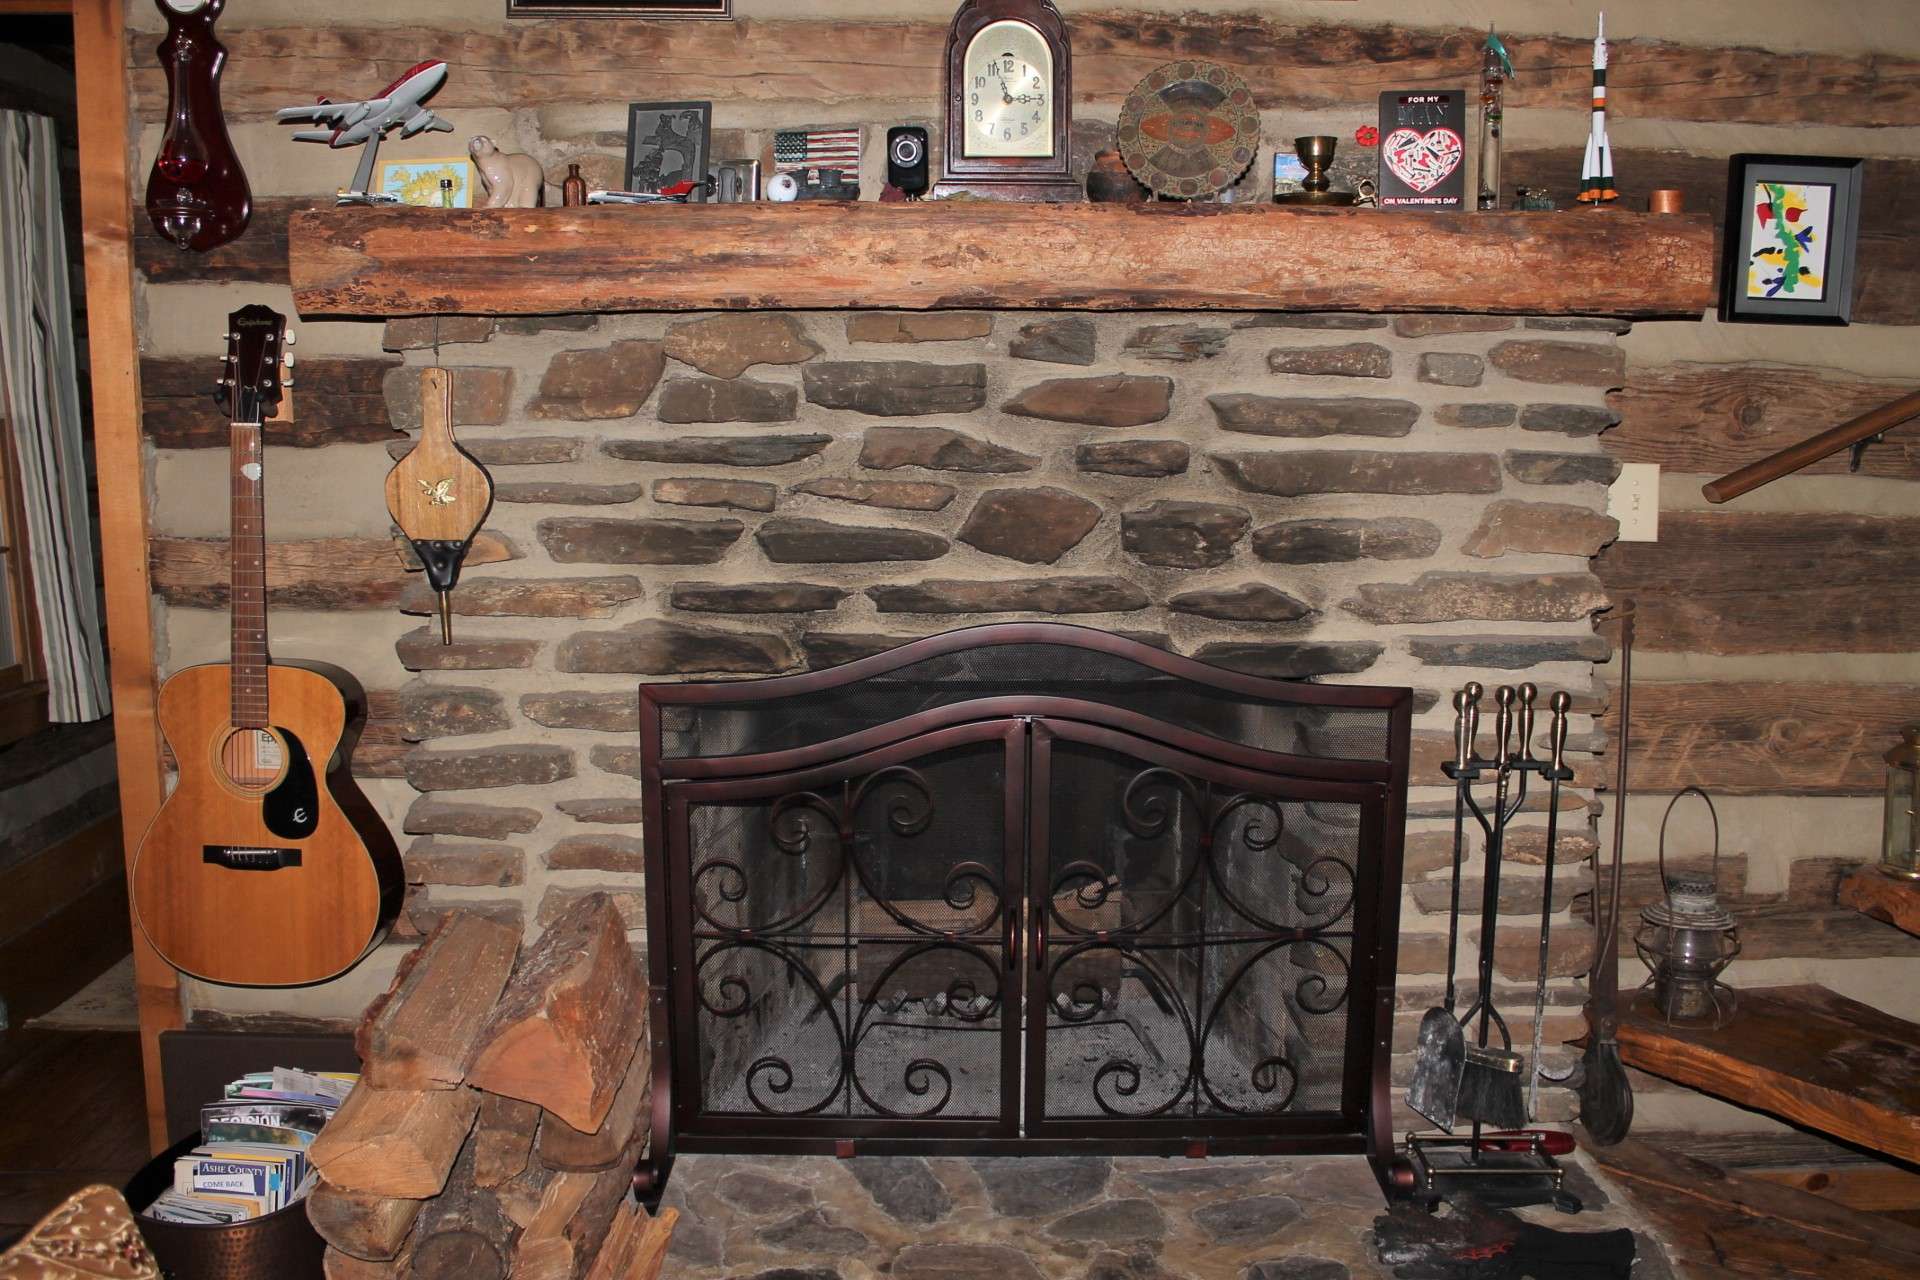 The native stone wood burning fireplace with rough hewn mantle provides a great way to display special keepsakes.